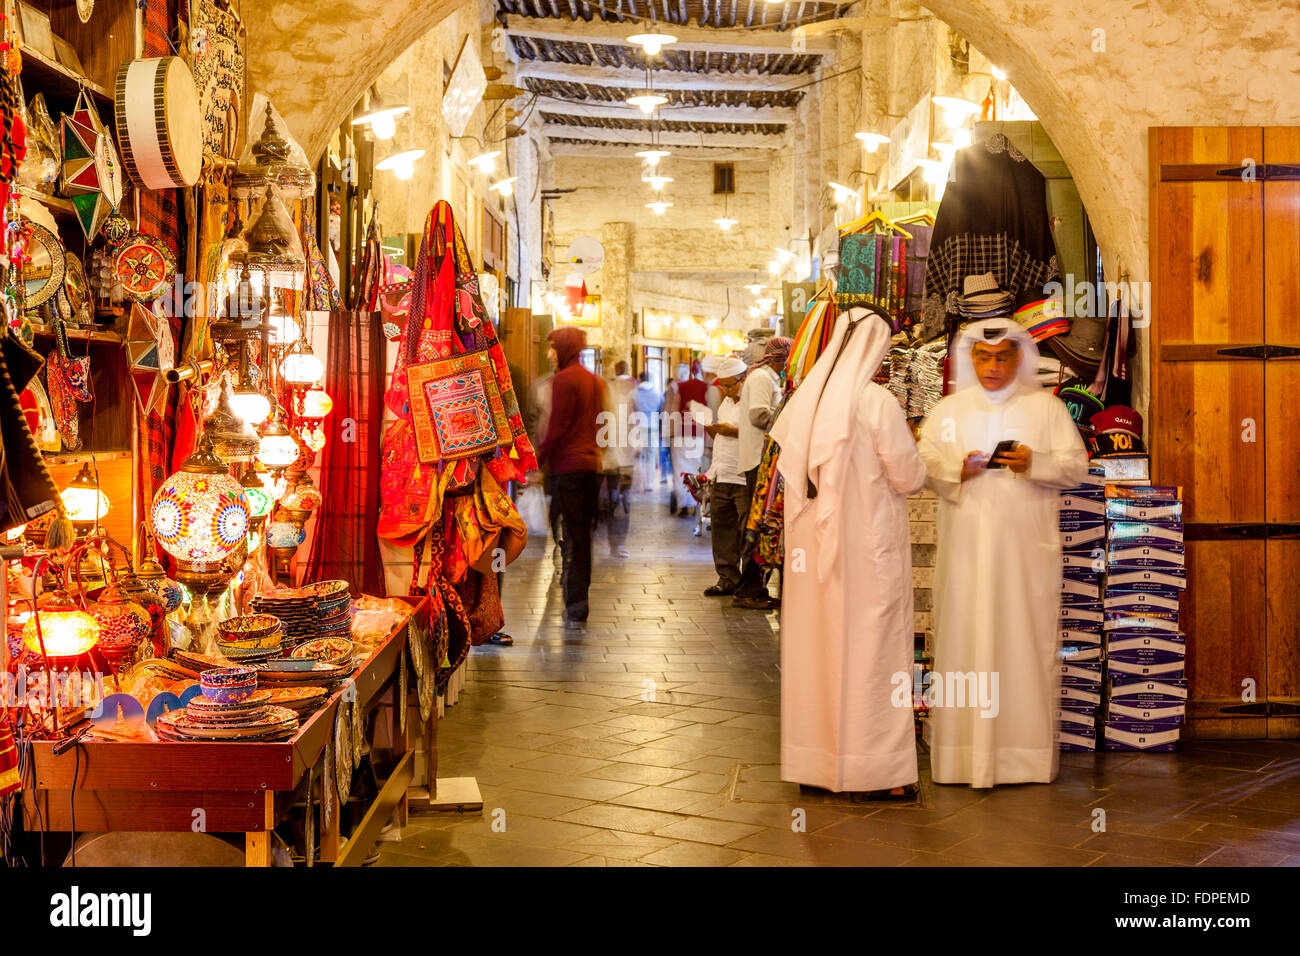 Colourful Shops In The Souk Waqif, Doha, Qatar Stock Photo